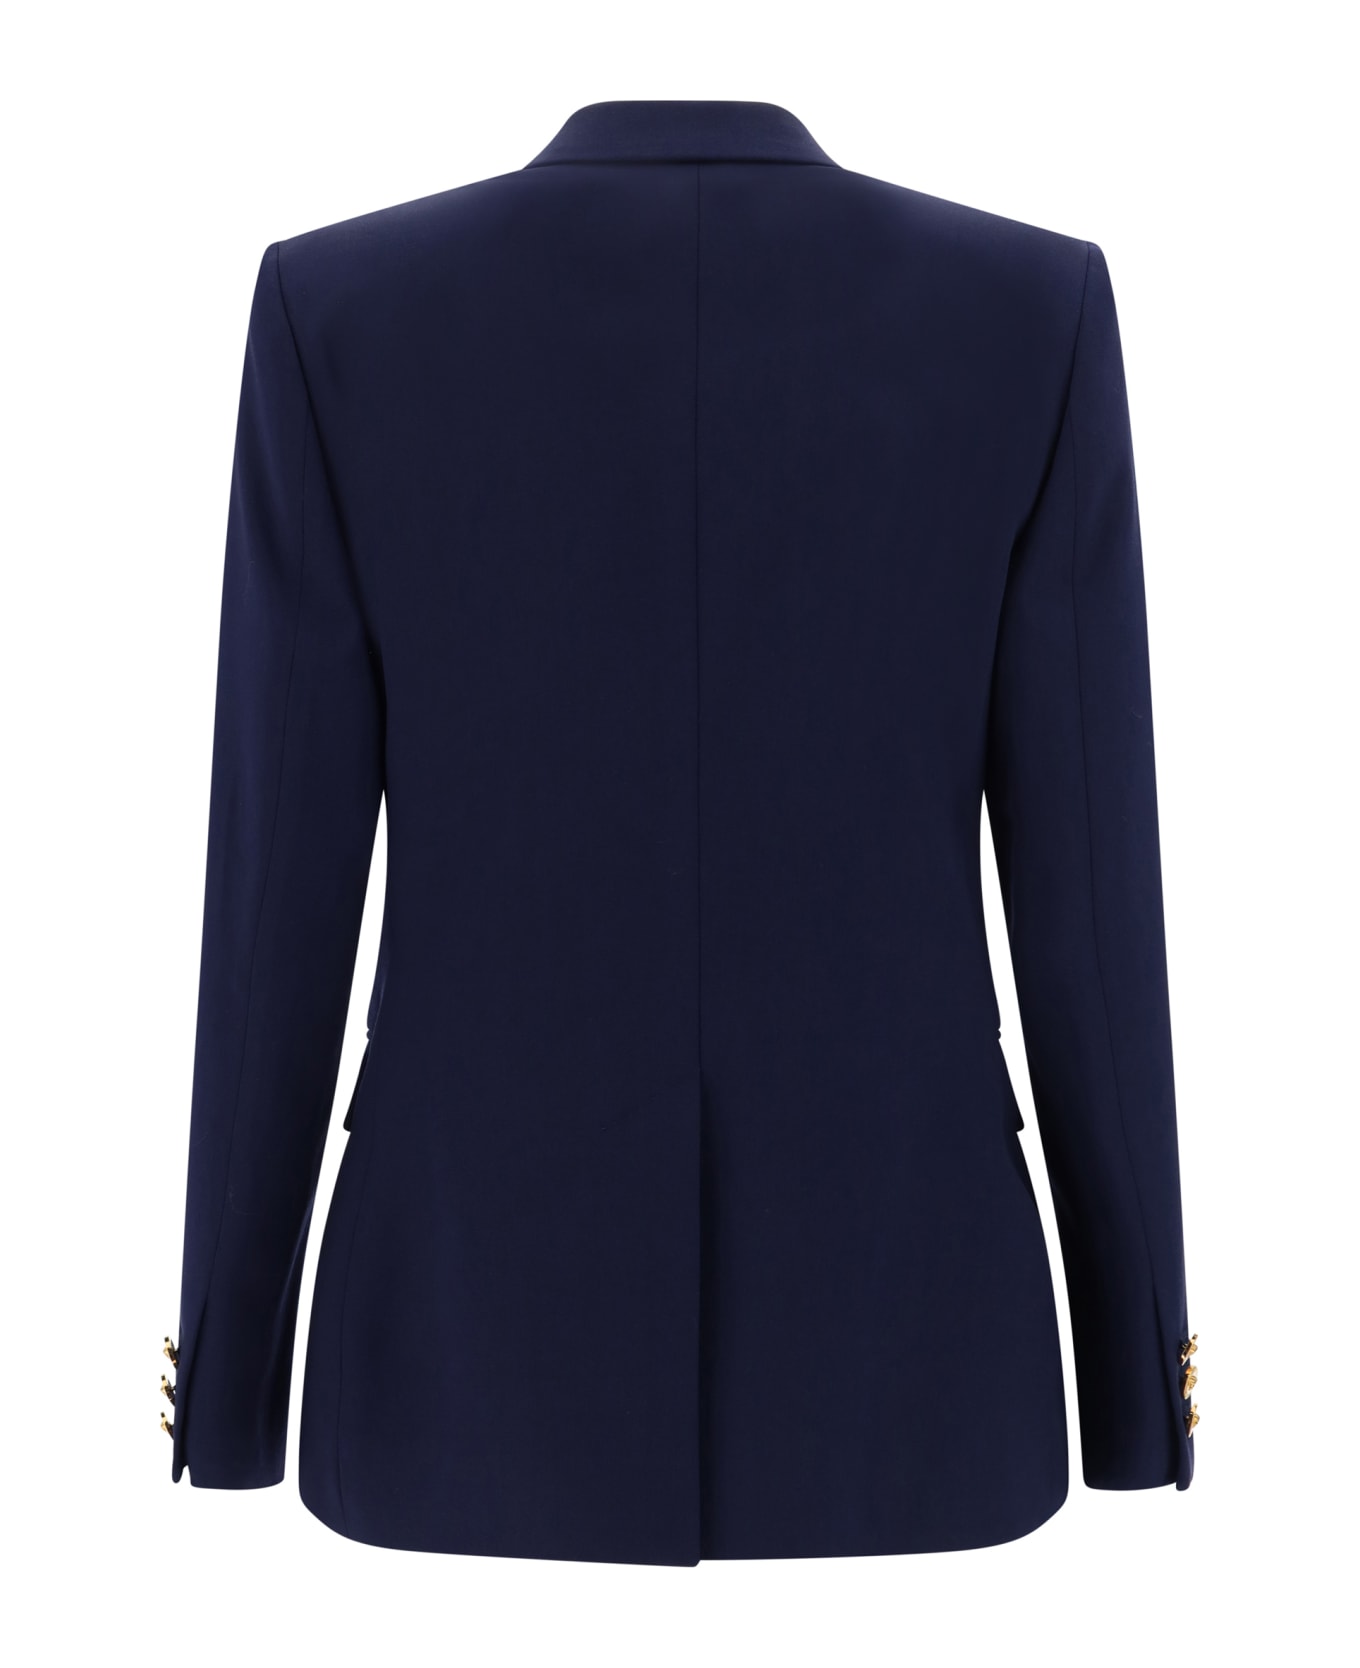 Versace Logo Patched Dinner Jacket - Navy Blue ブレザー